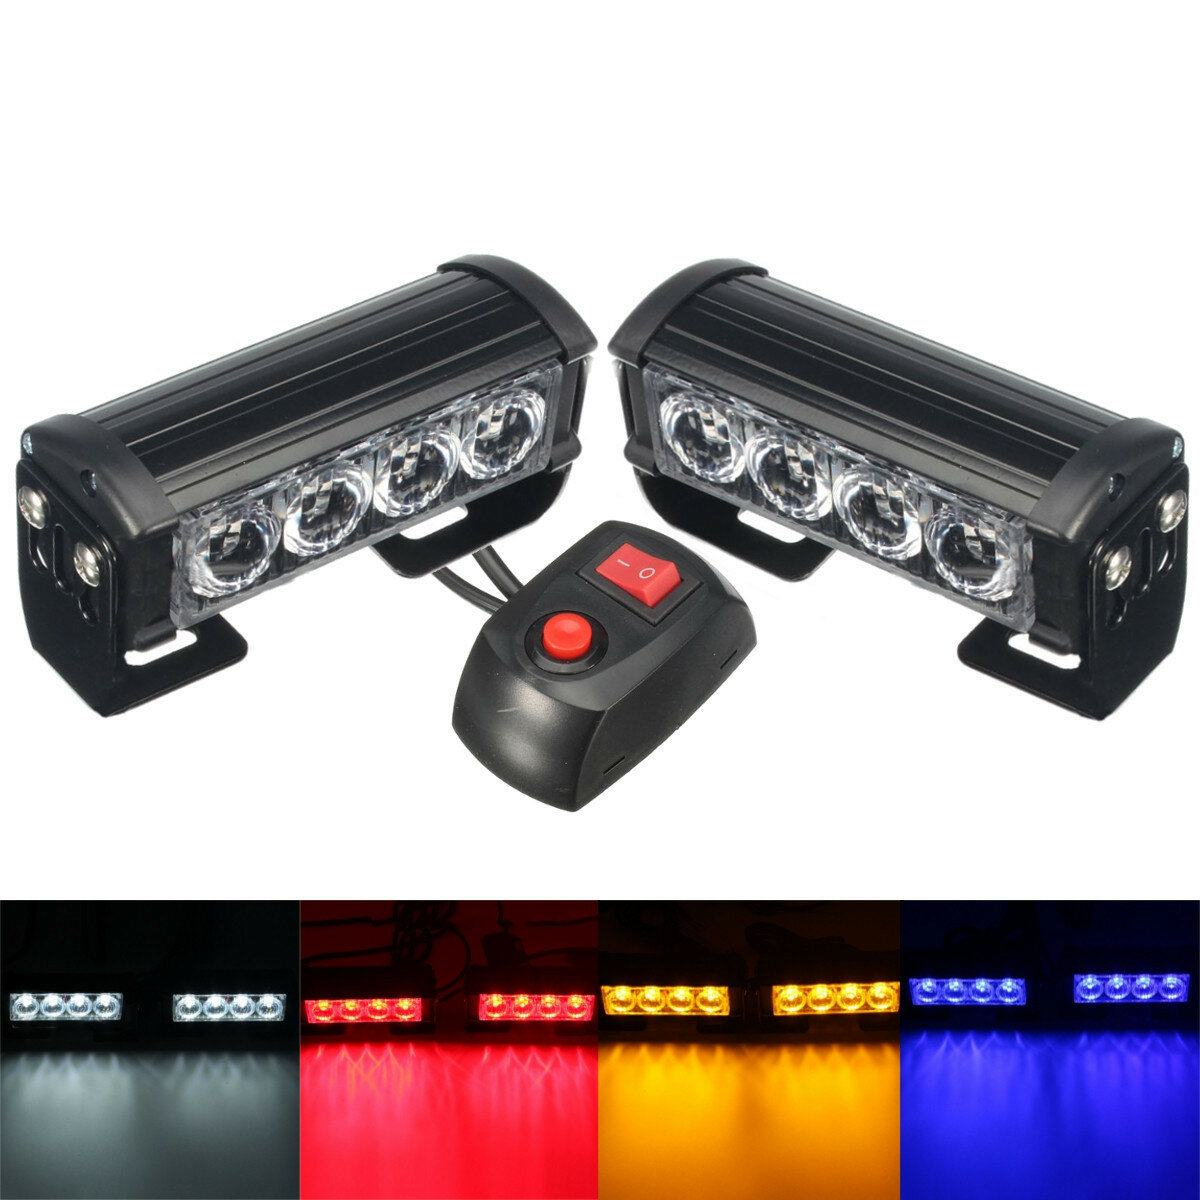 

2PCS 12V LED Strobe Flash Lights Front Grille Warning Lamp Waterproof with 7 Flashing Modes Switch for Truck Lorry Trail